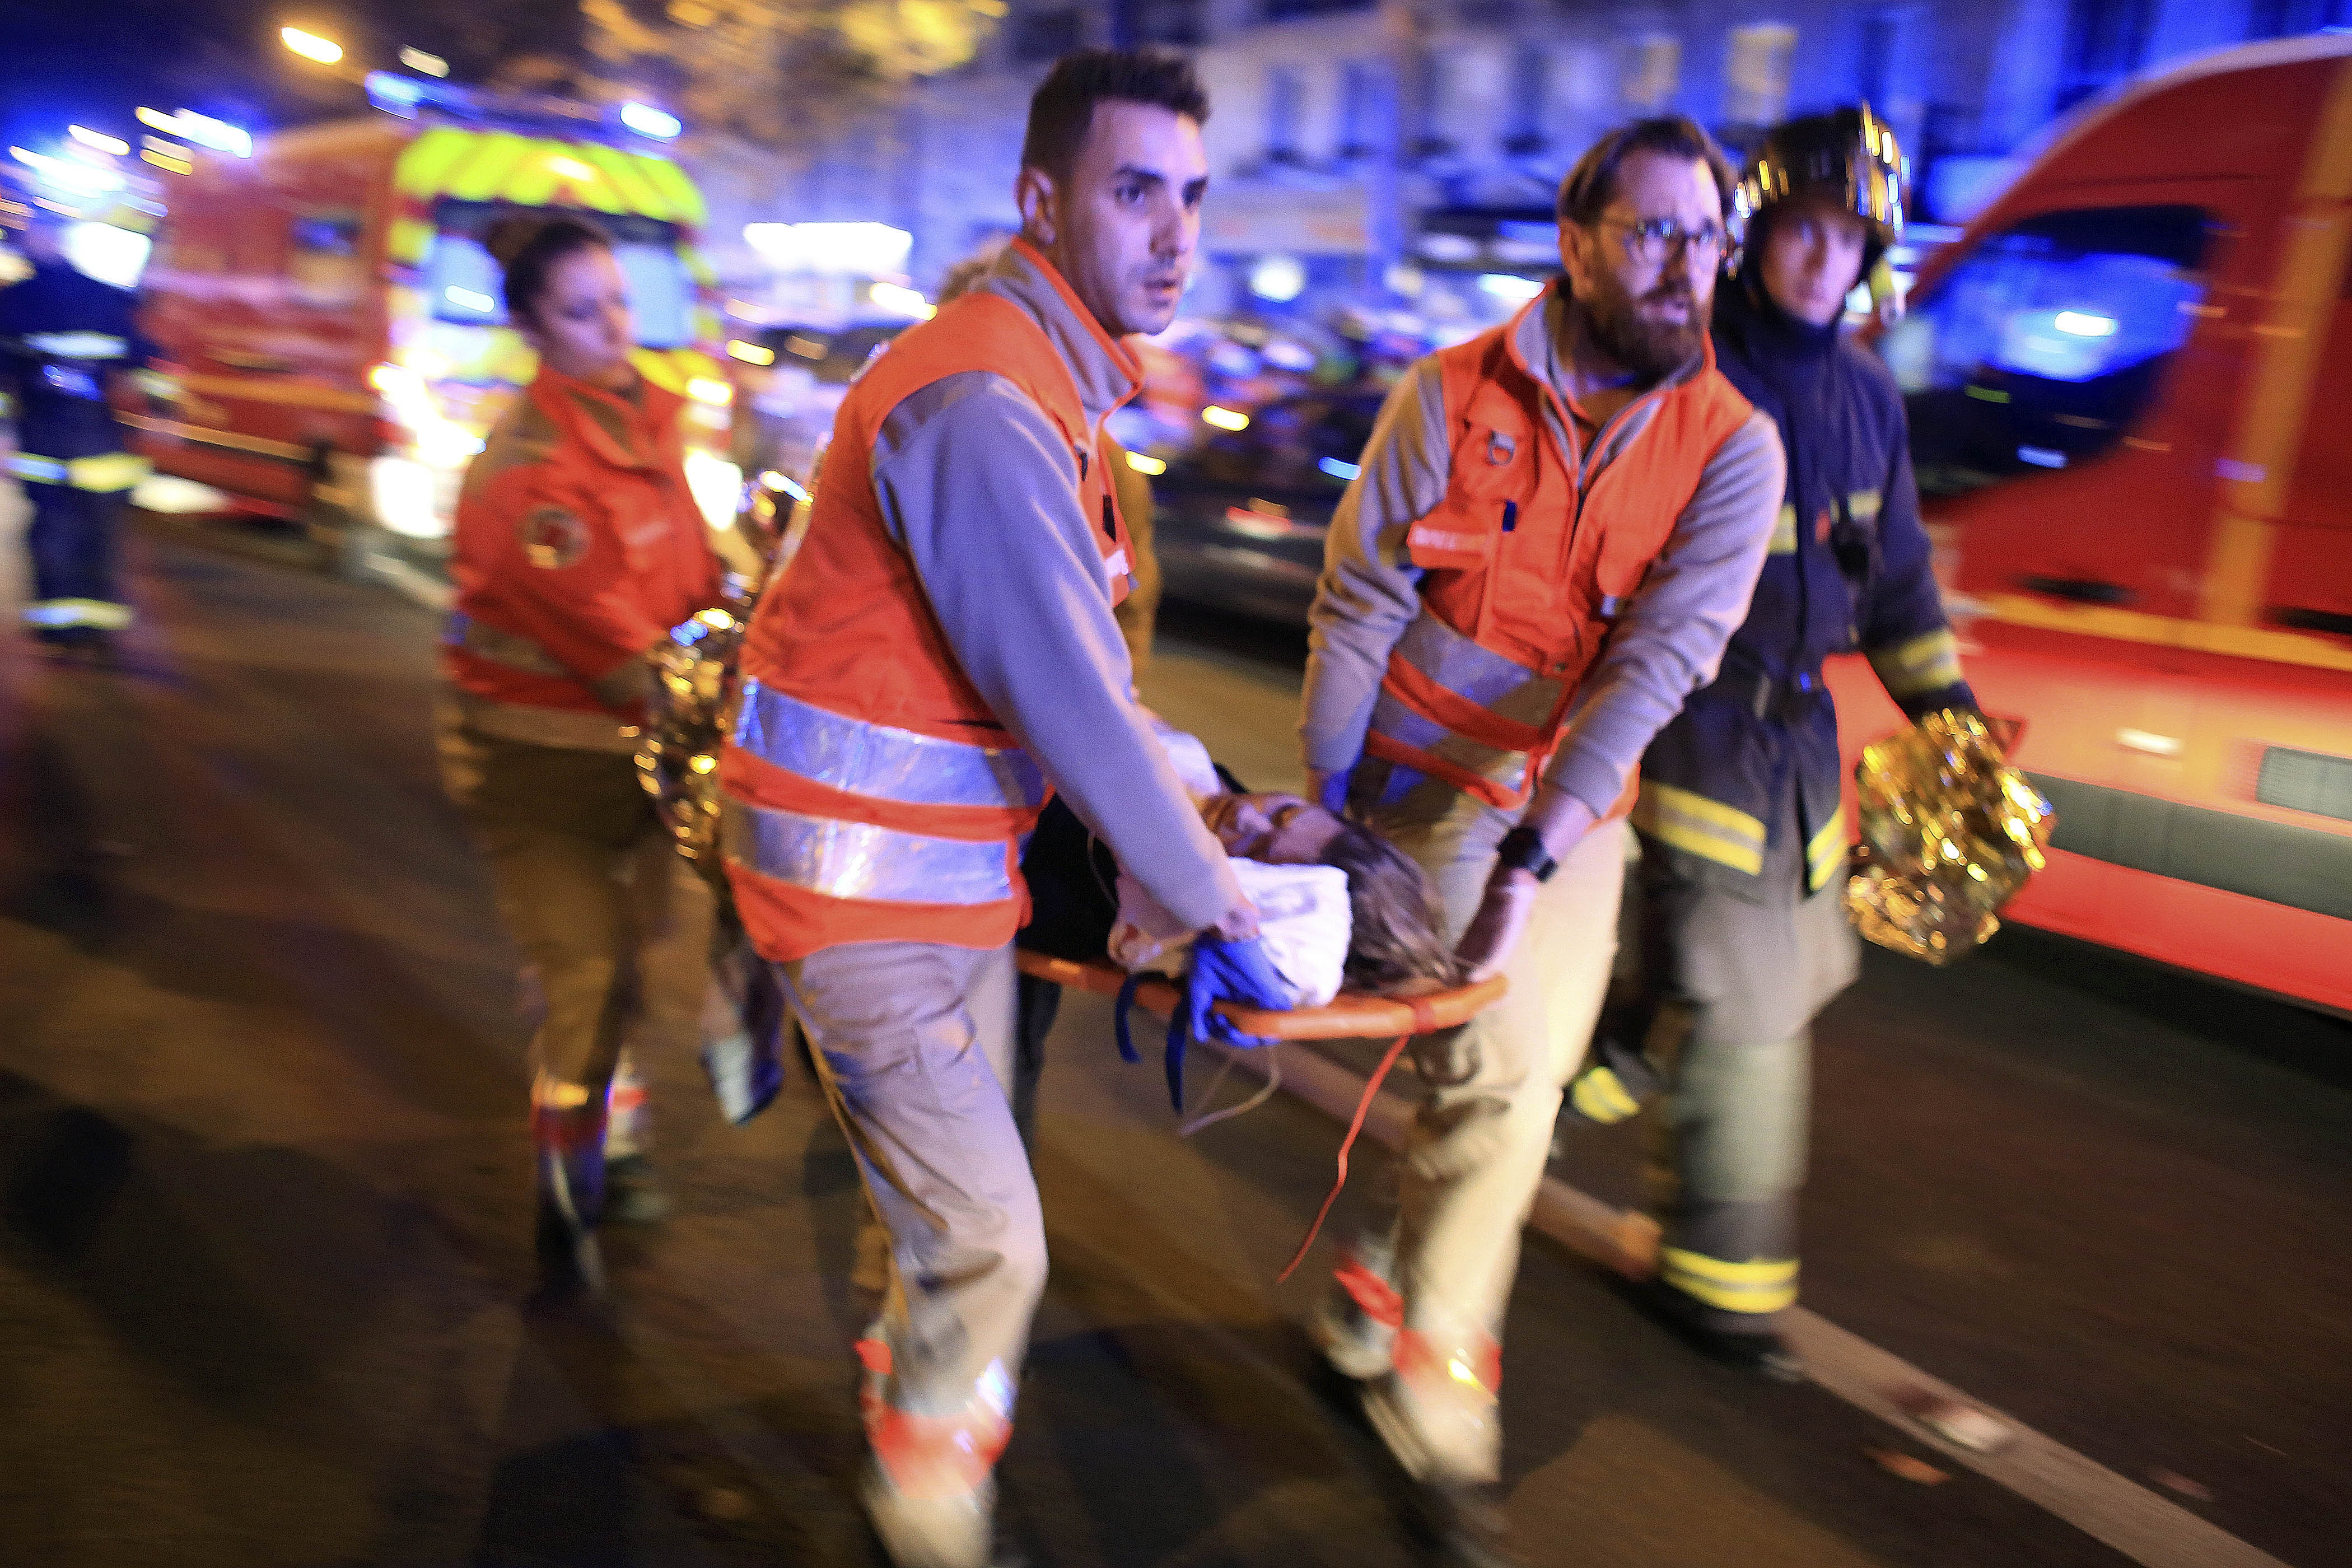 FILE - In this Nov. 13, 2015, file photo, a woman is being evacuated from the Bataclan concert hall after a shooting in Paris. In a poll conducted by the Associated Press and the Times Square Alliance, 64 percent of those polled believe the attacks on Charlie Hebdo and the Jewish market, then the Bataclan concert hall and other city sites, were among the very or extremely important news events of 2015. (AP Photo/Thibault Camus, File)